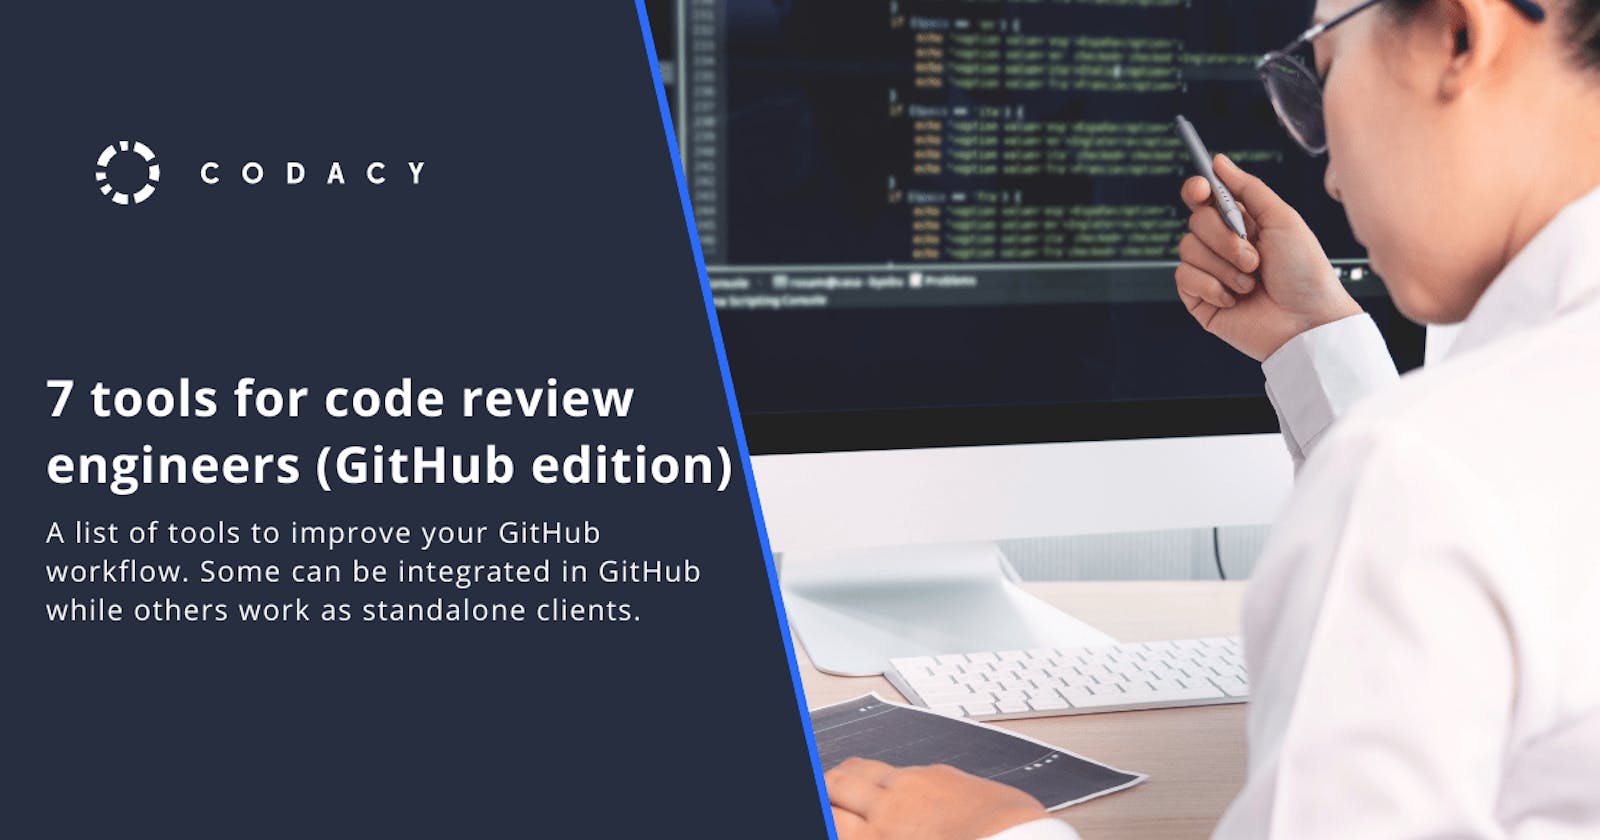 7 tools for code review engineers (GitHub edition)